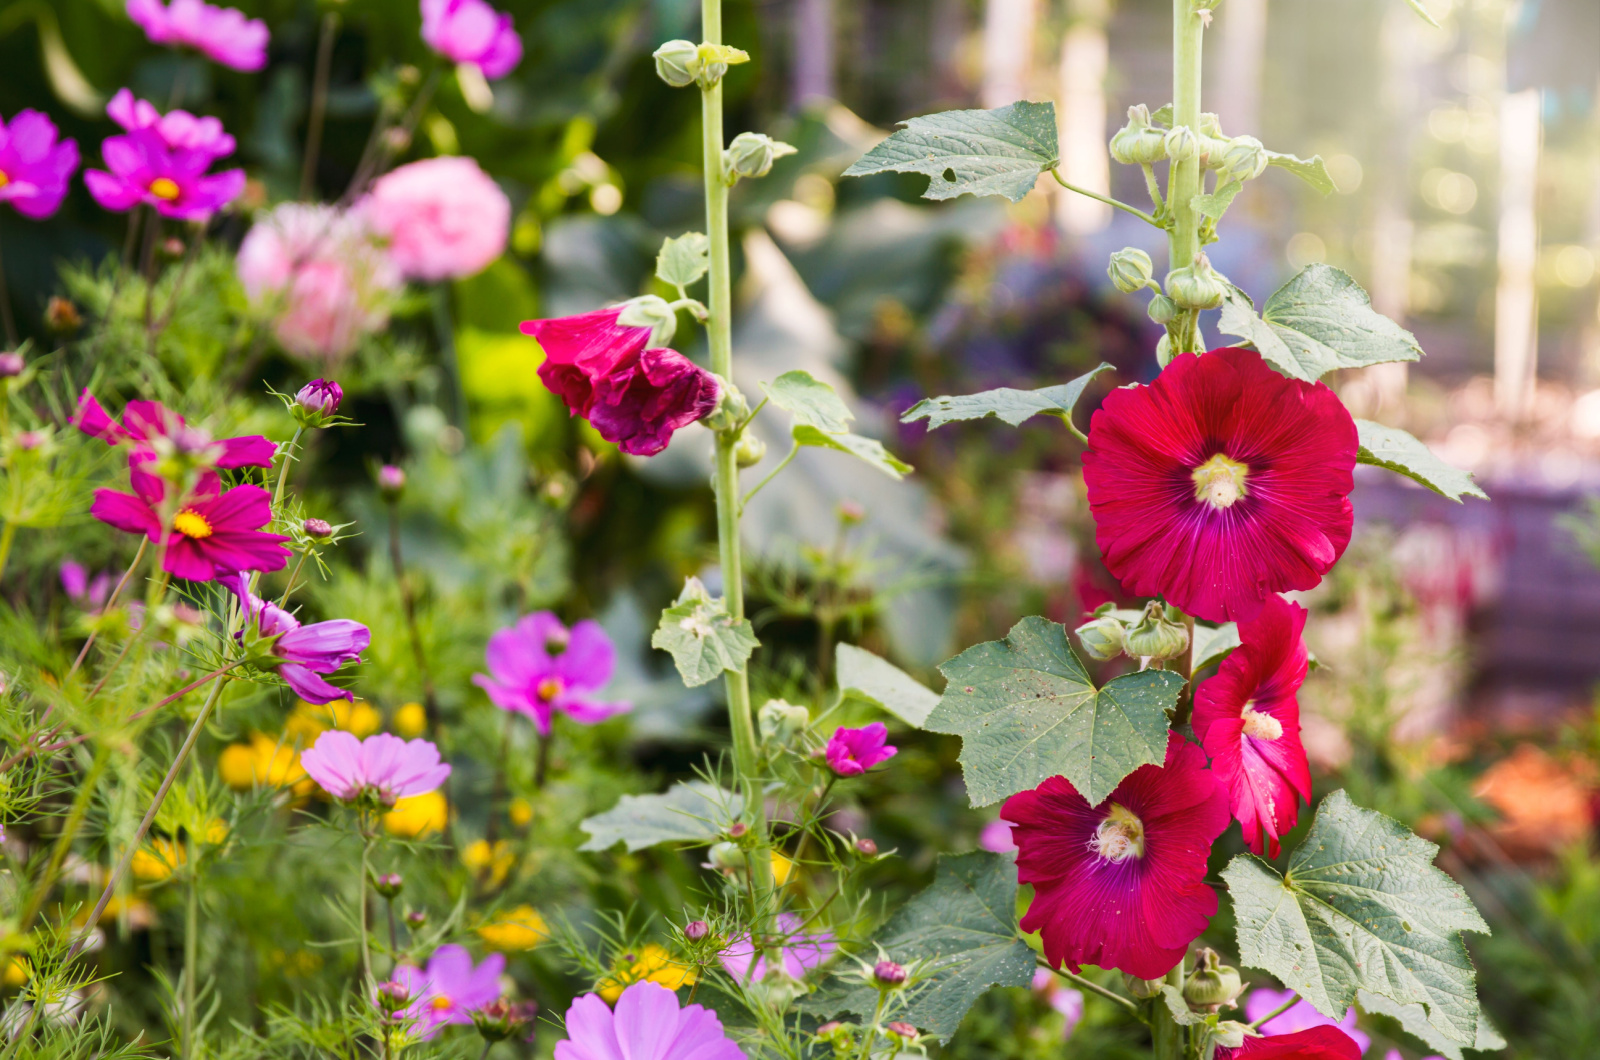 hollyhock flowers bloom mixed with garden cosmos and poppies in a garden